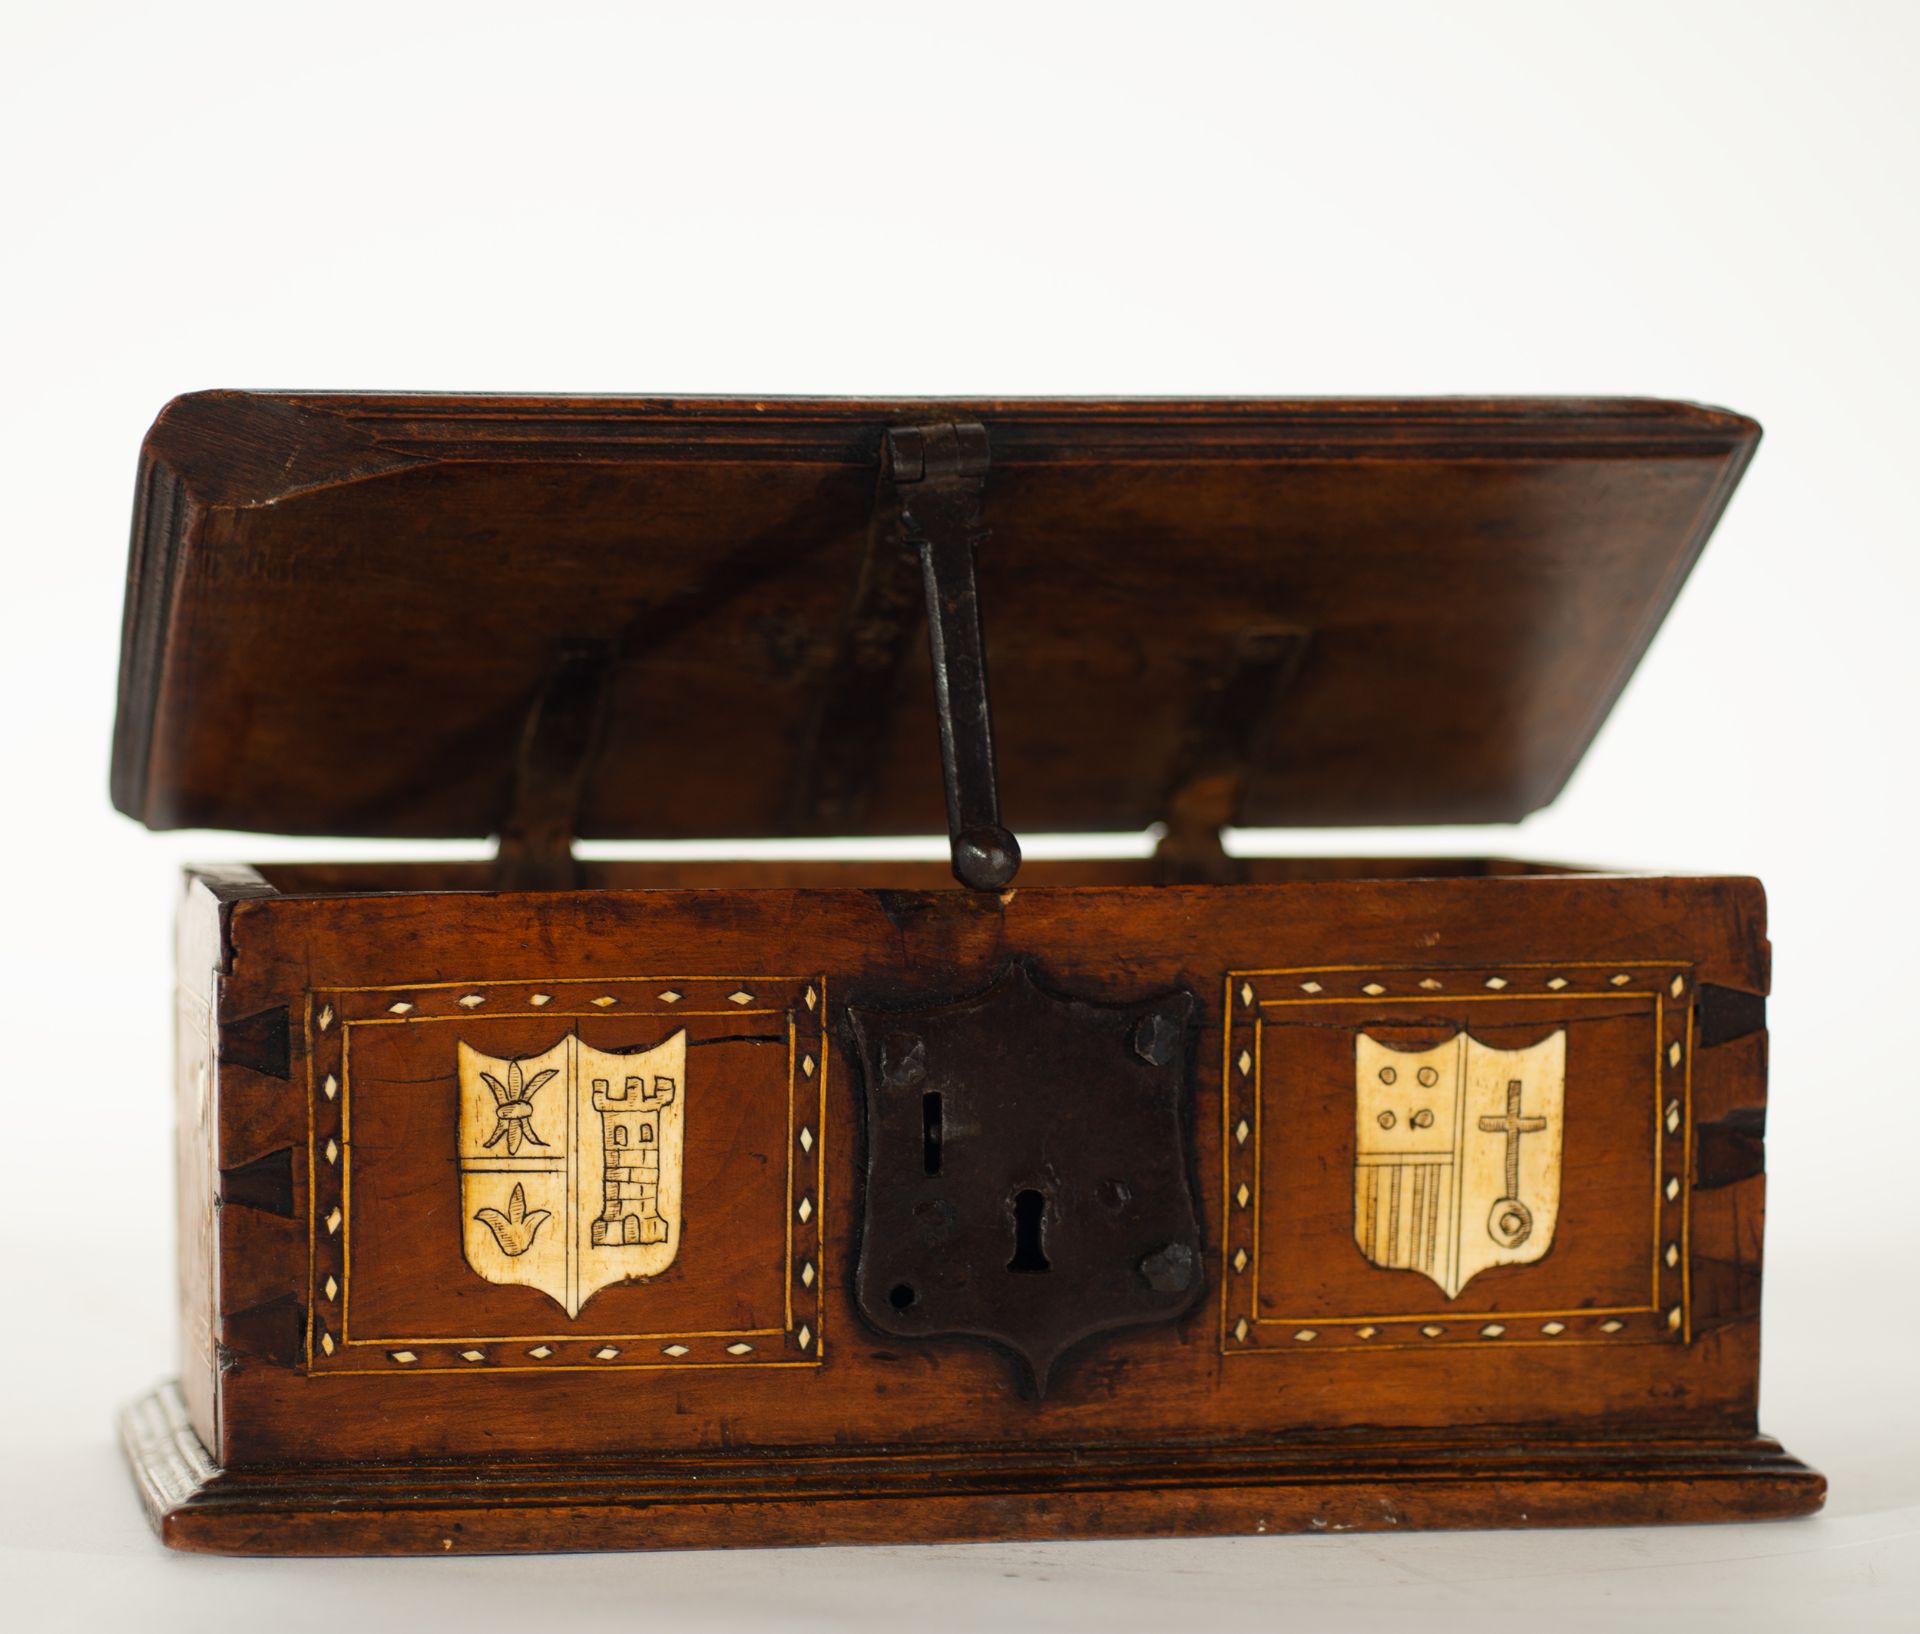 Plateresque style box in fruit wood and bone marquetry, Spanish school of the 19th - 20th centuries